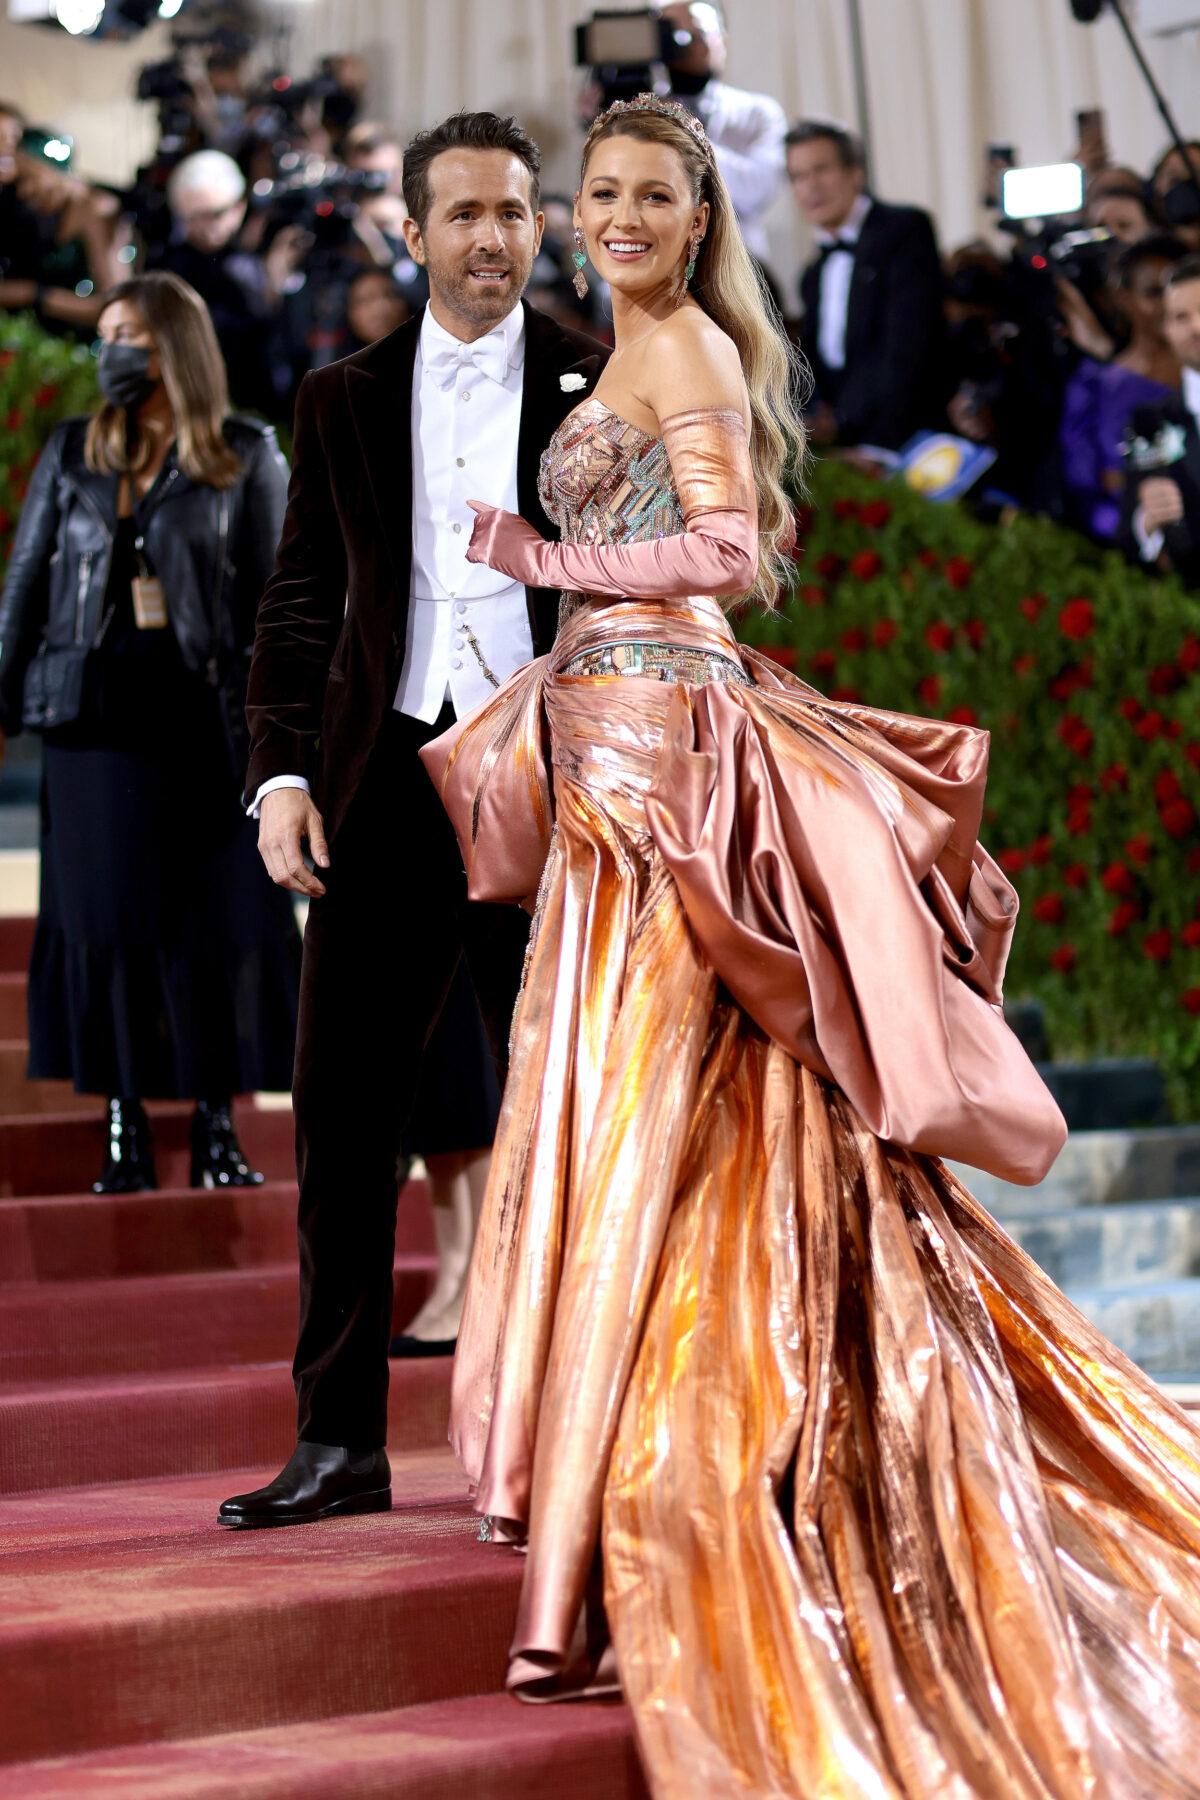 Met Gala Co-Chairs Ryan Reynolds and Blake Lively (L) attend The 2022 Met Gala Celebrating "In America: An Anthology of Fashion" at The Metropolitan Museum of Art in New York on May 2, 2022. (Dimitrios Kambouris/Getty Images for The Met Museum/Vogue)